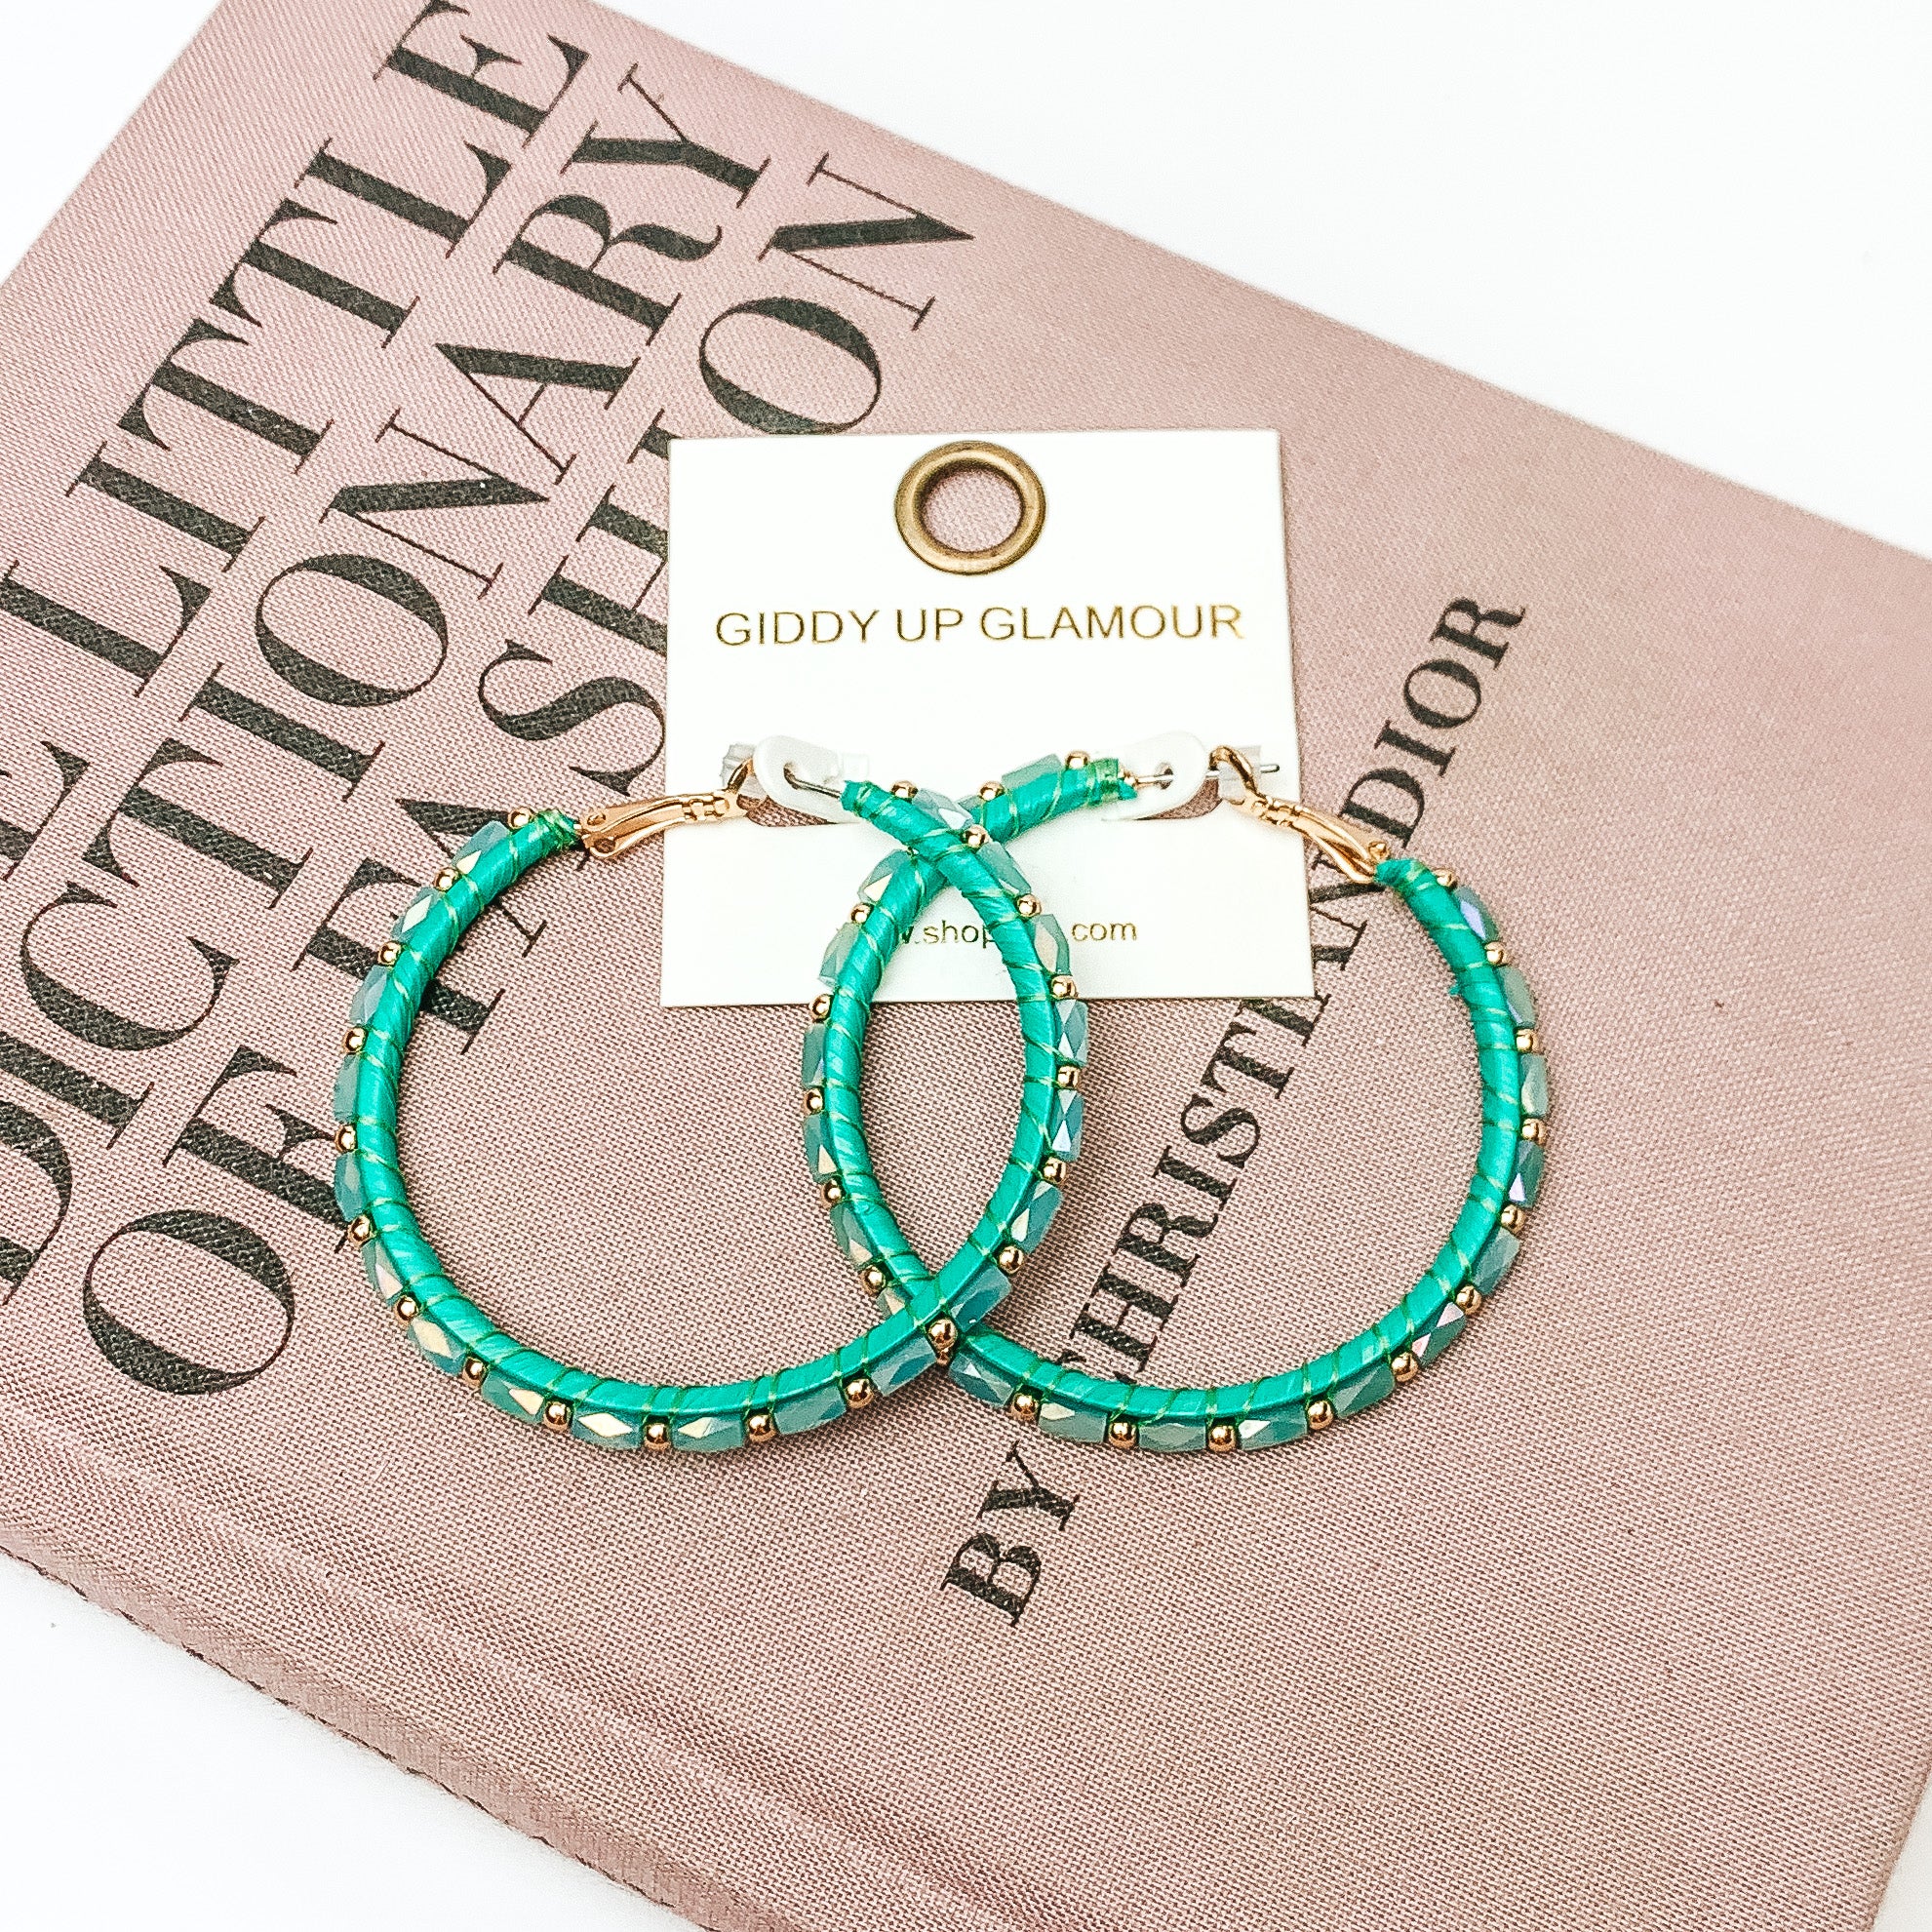 Pictured are circle beaded hoop earrings with gold spacers in green. They are pictured with a pink fashion journal on a white background